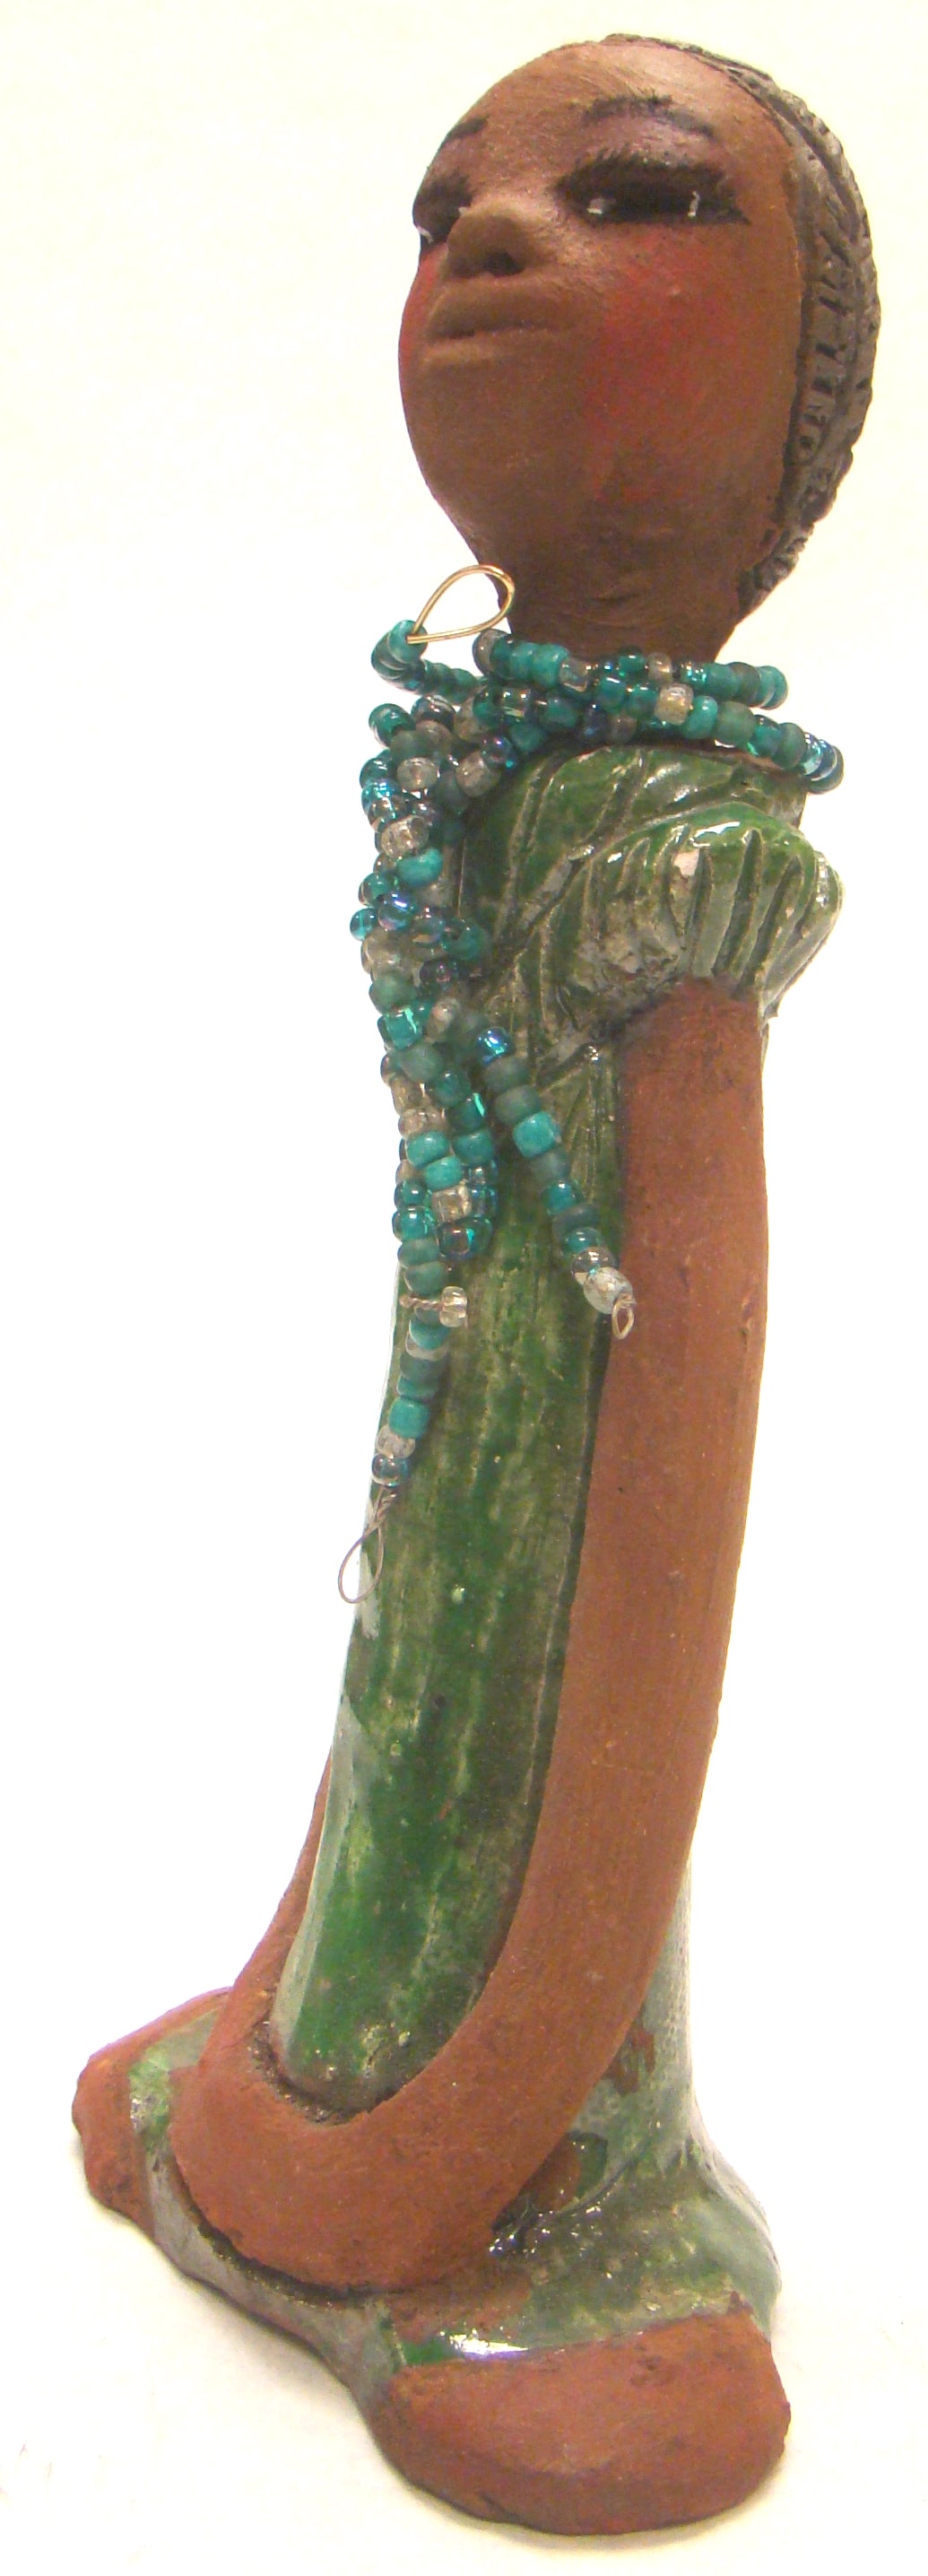      Fatou stands 9" x 4.5" x 2" and weighs 1.03 lbs.     She has a lovely honey brown complexion and long loving arms.     Fatou has an emerald glazed dress with a strand of multicolored beads.     Her hair is raku smokey black and is etched in clay.     Fatou is eye catching and will grace your surroundings.